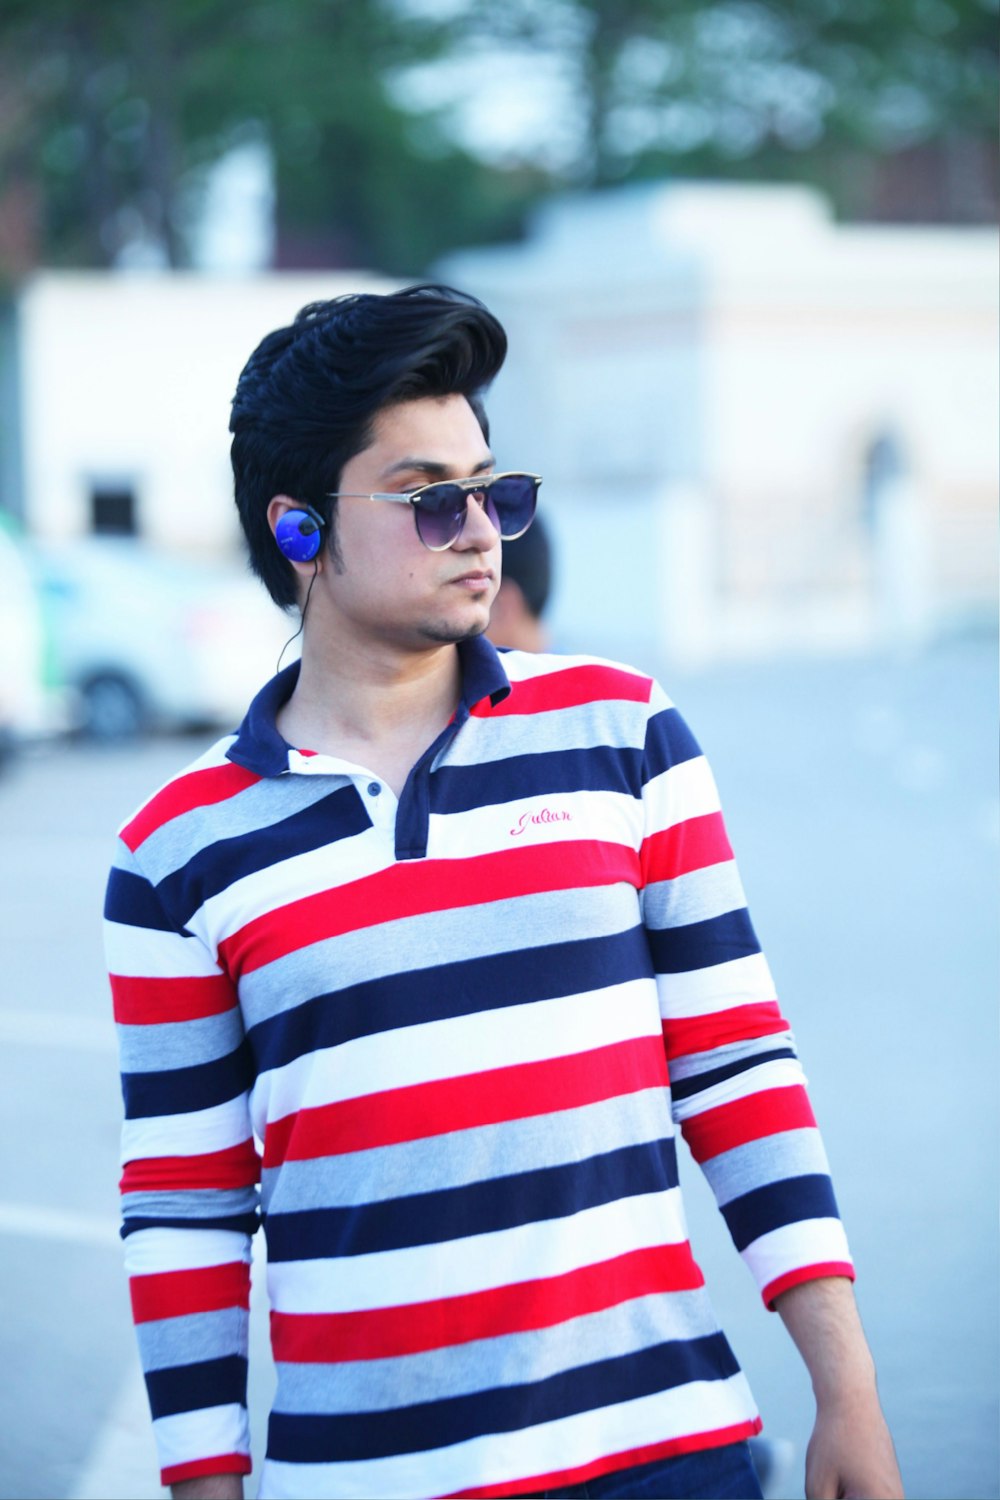 man wearing red and white striped shirt